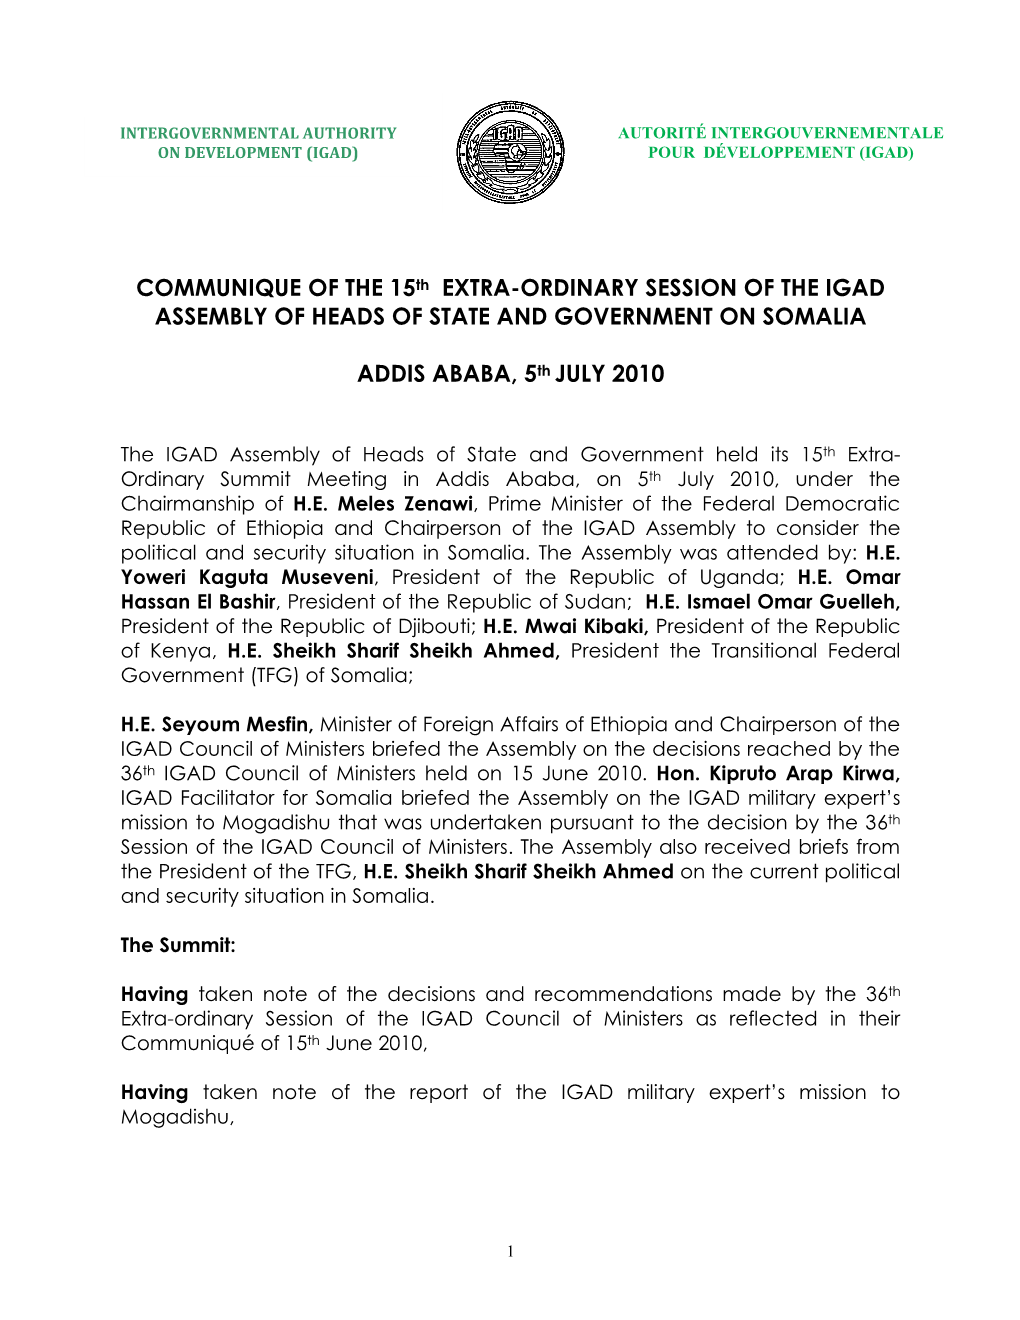 COMMUNIQUE of the 15Th EXTRA-ORDINARY SESSION of the IGAD ASSEMBLY of HEADS of STATE and GOVERNMENT on SOMALIA